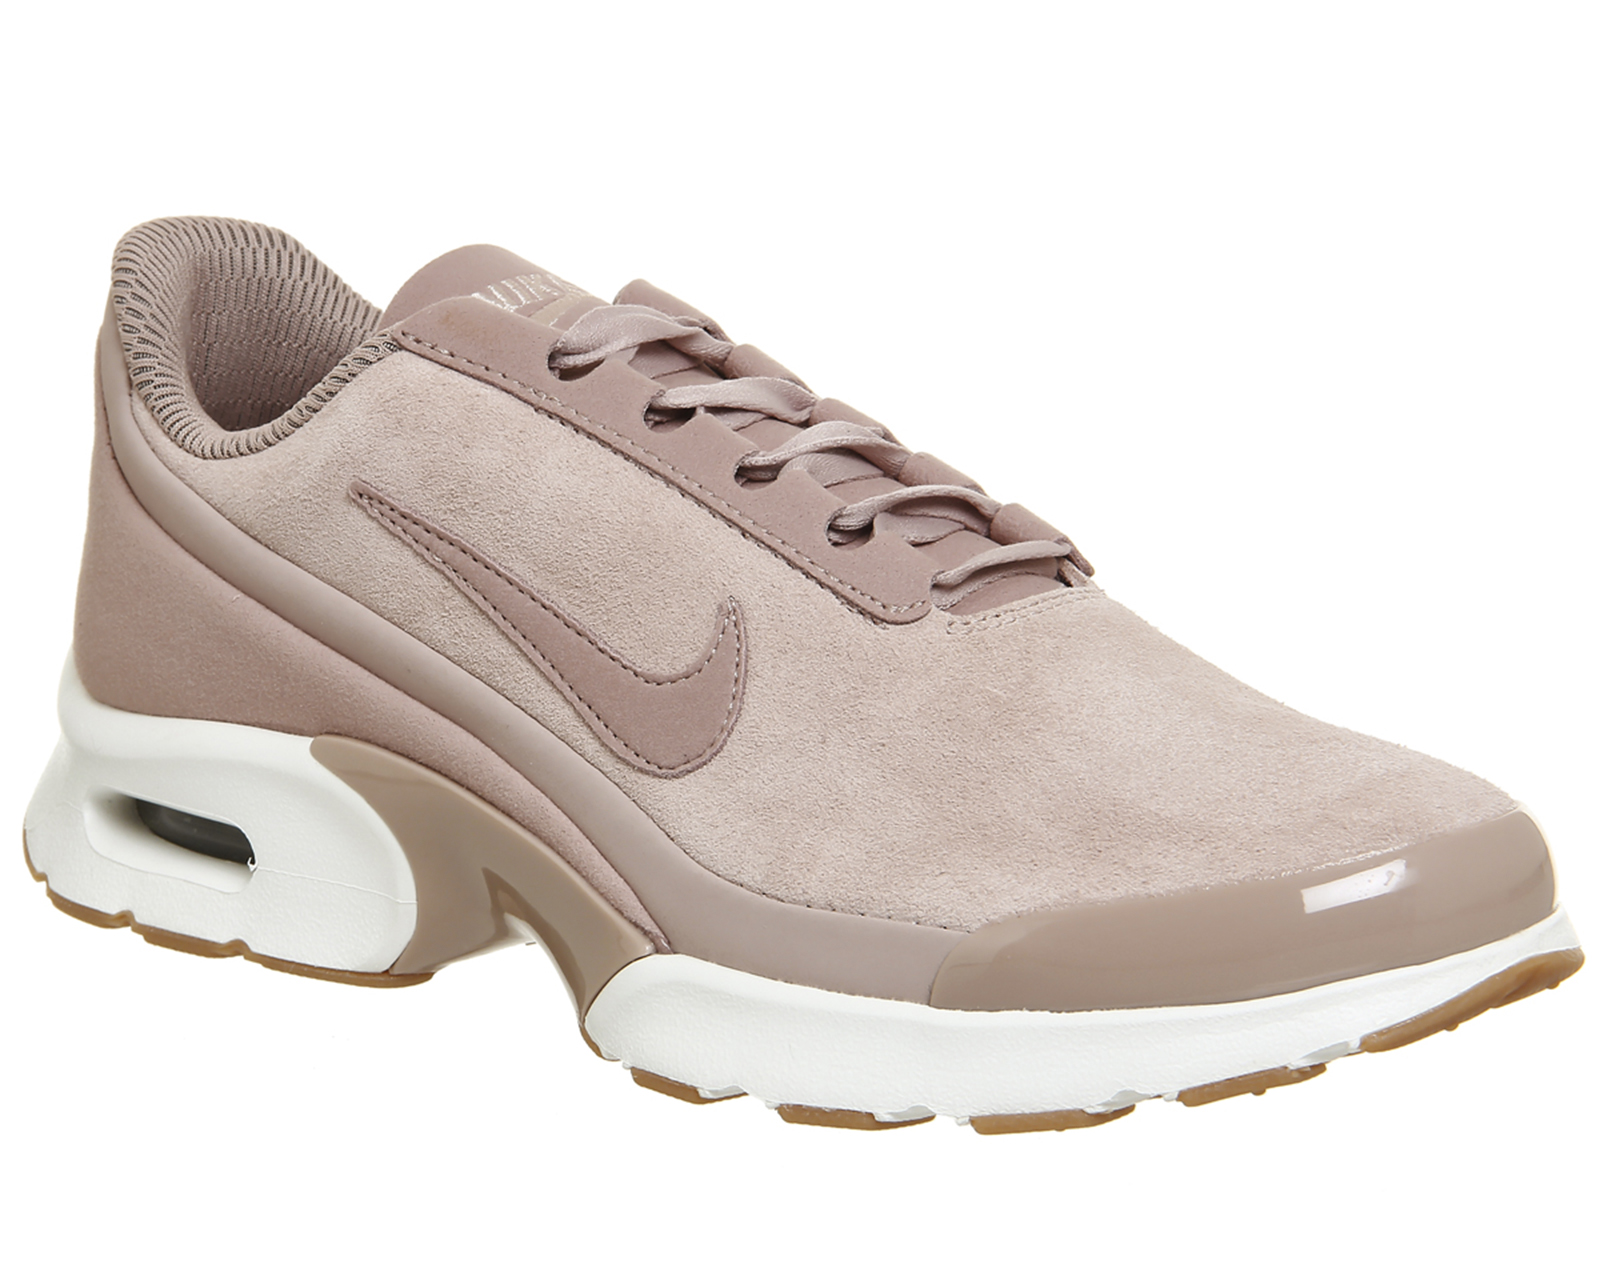 Nike Air Max Jewell Particle Pink White - Hers trainers